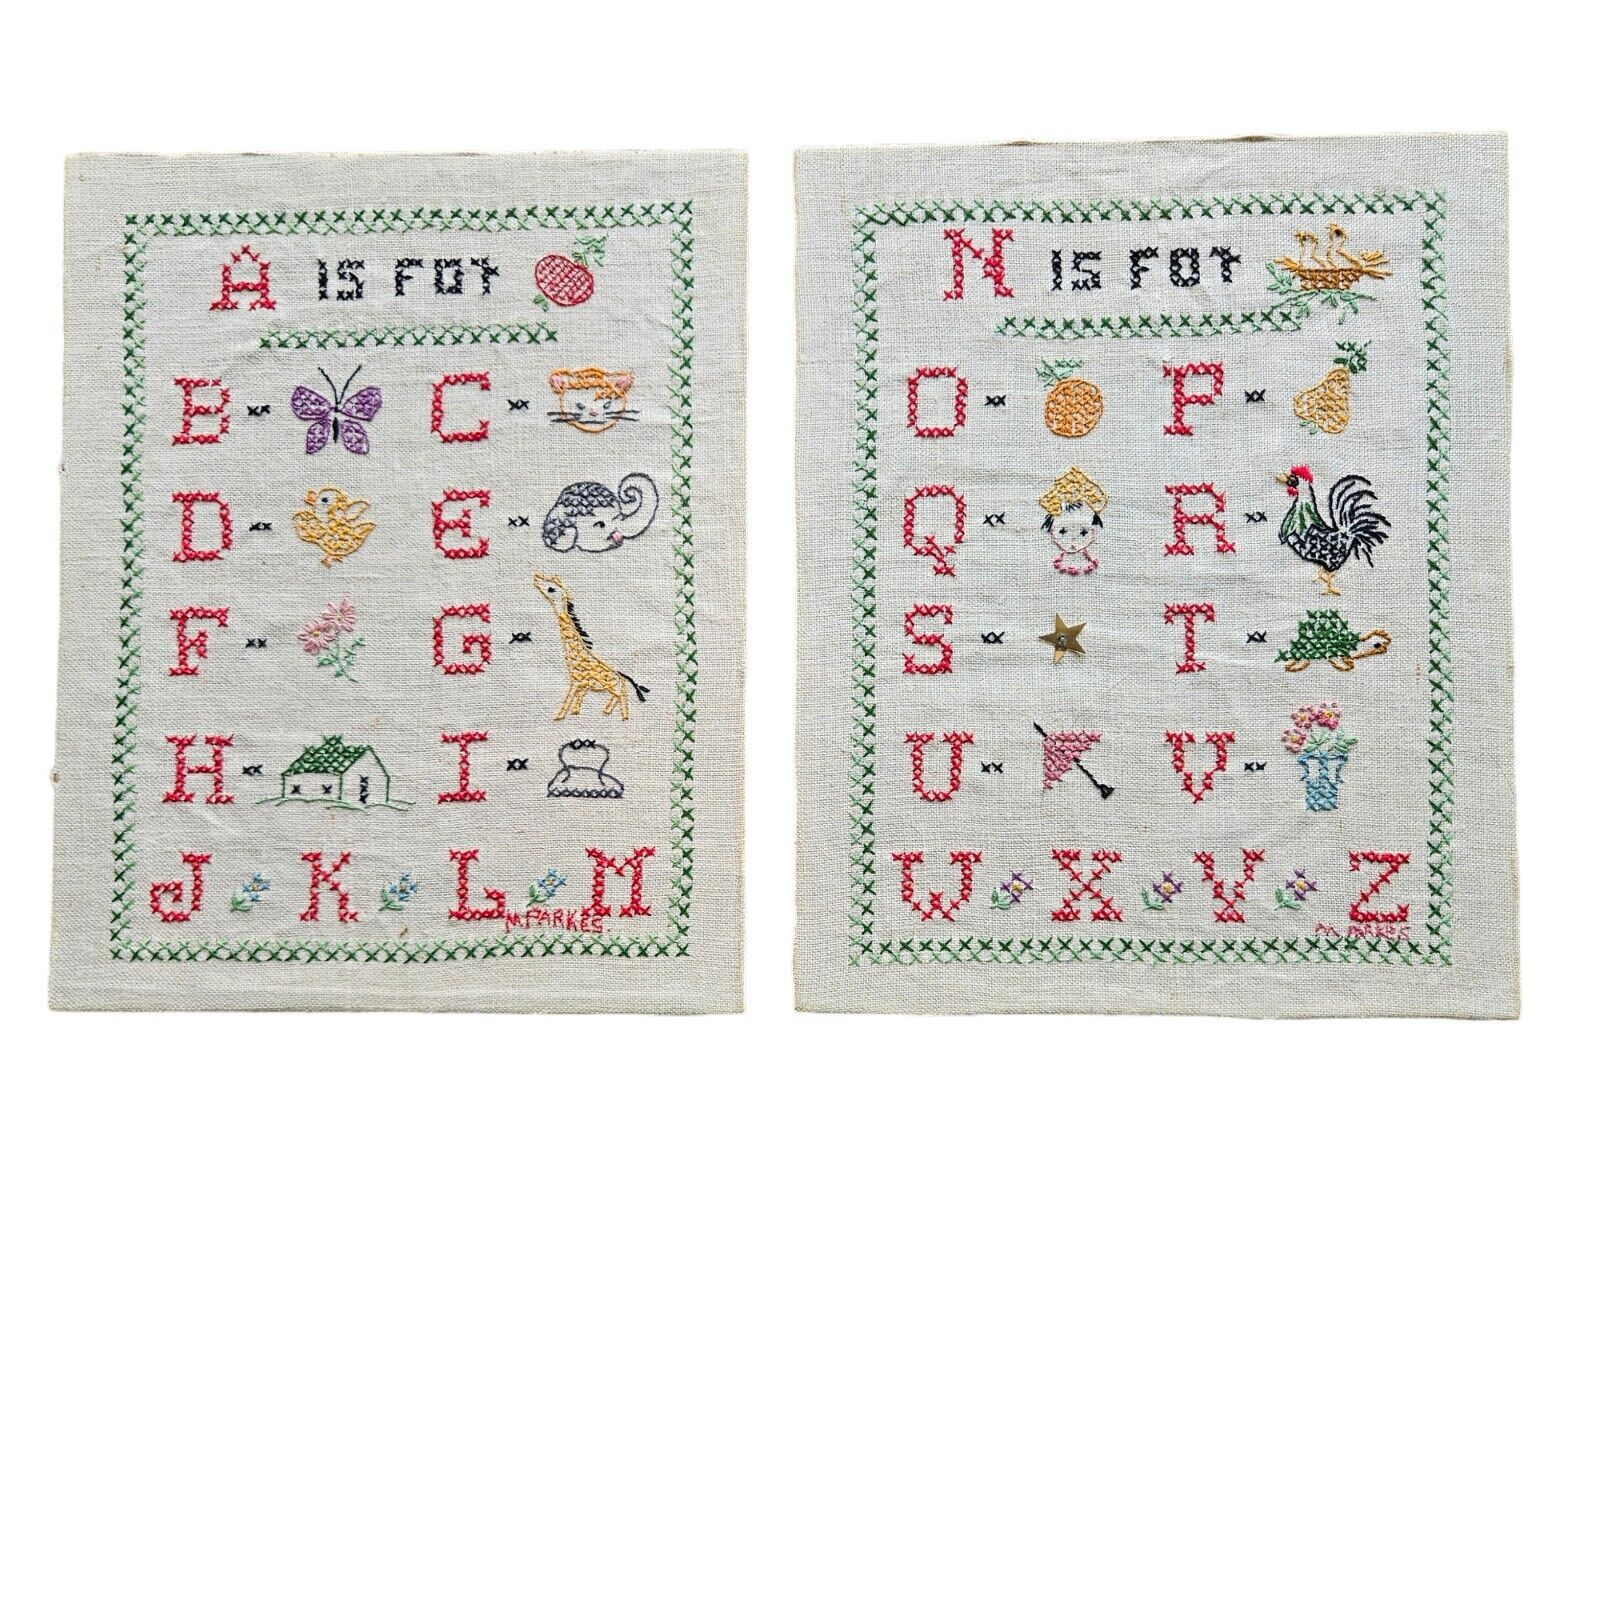 Alphabet Cross Stitch Signed Sampler A is for Apple Vintage Embroidery Wall Art